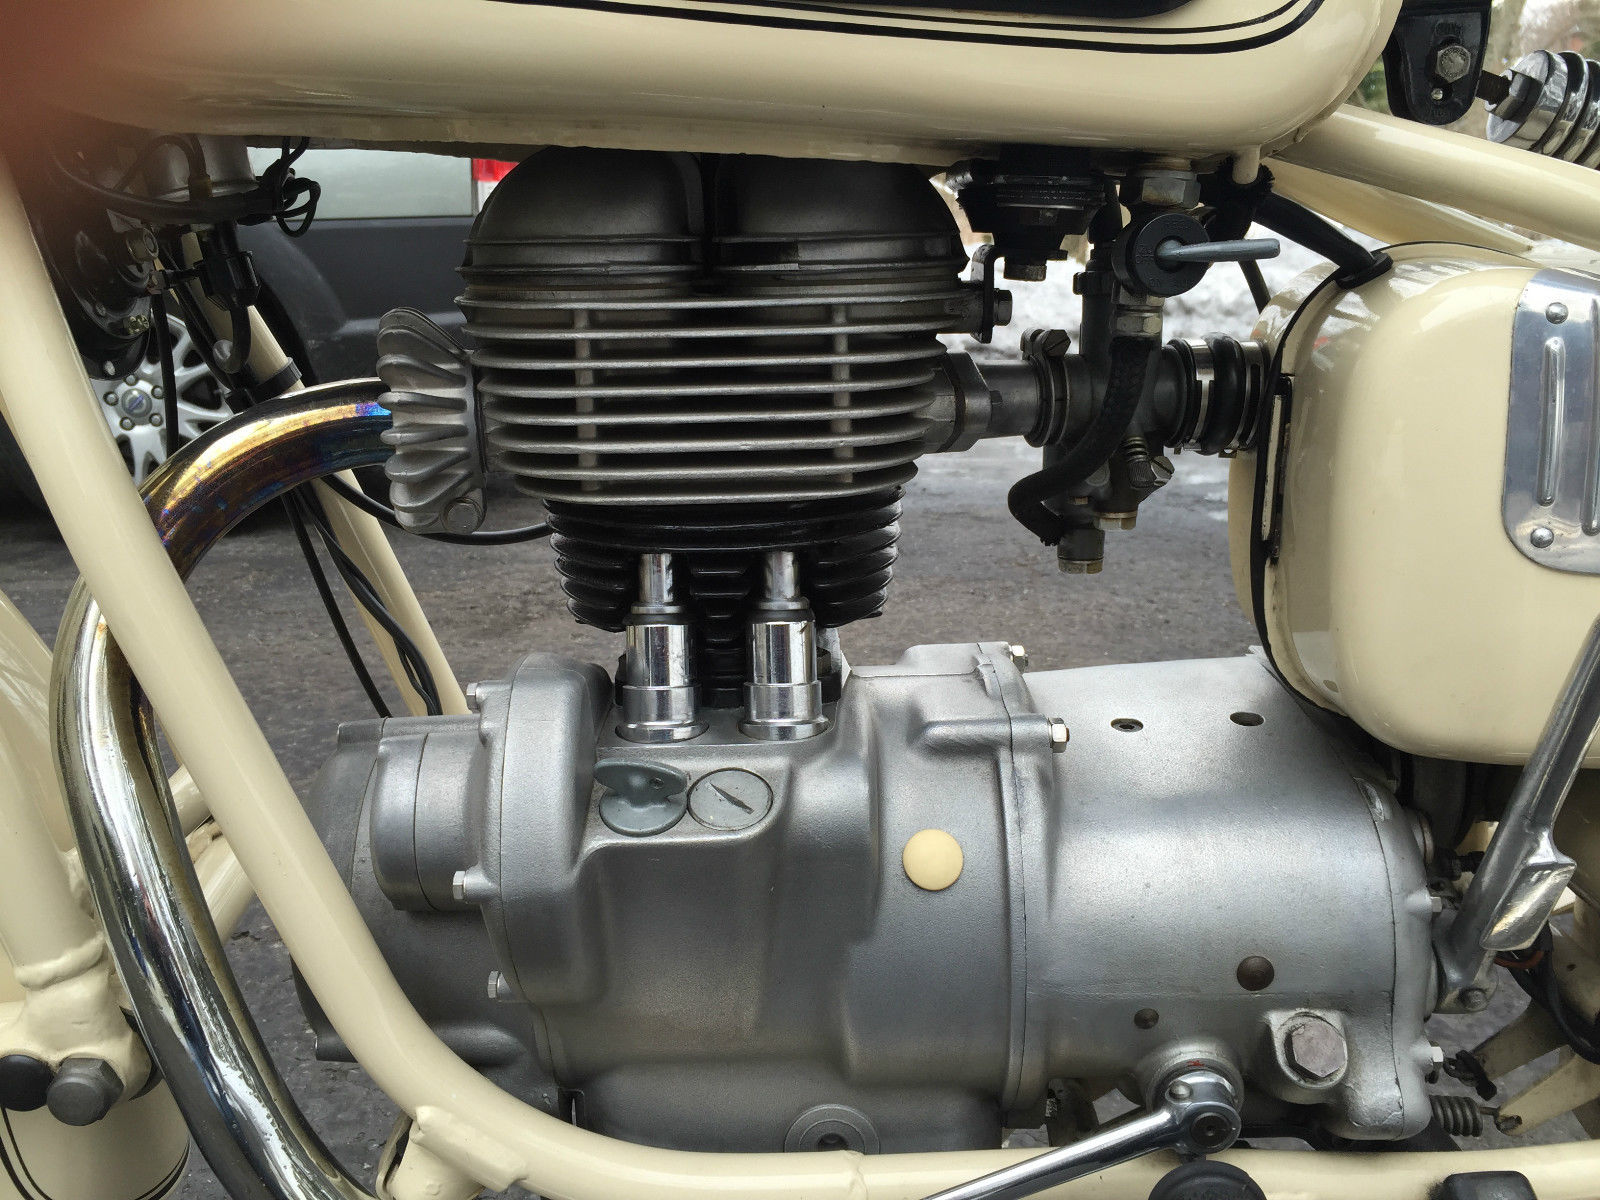 BMW R27 - 1965 - Engine and Gearbox, Motor and Transmission.